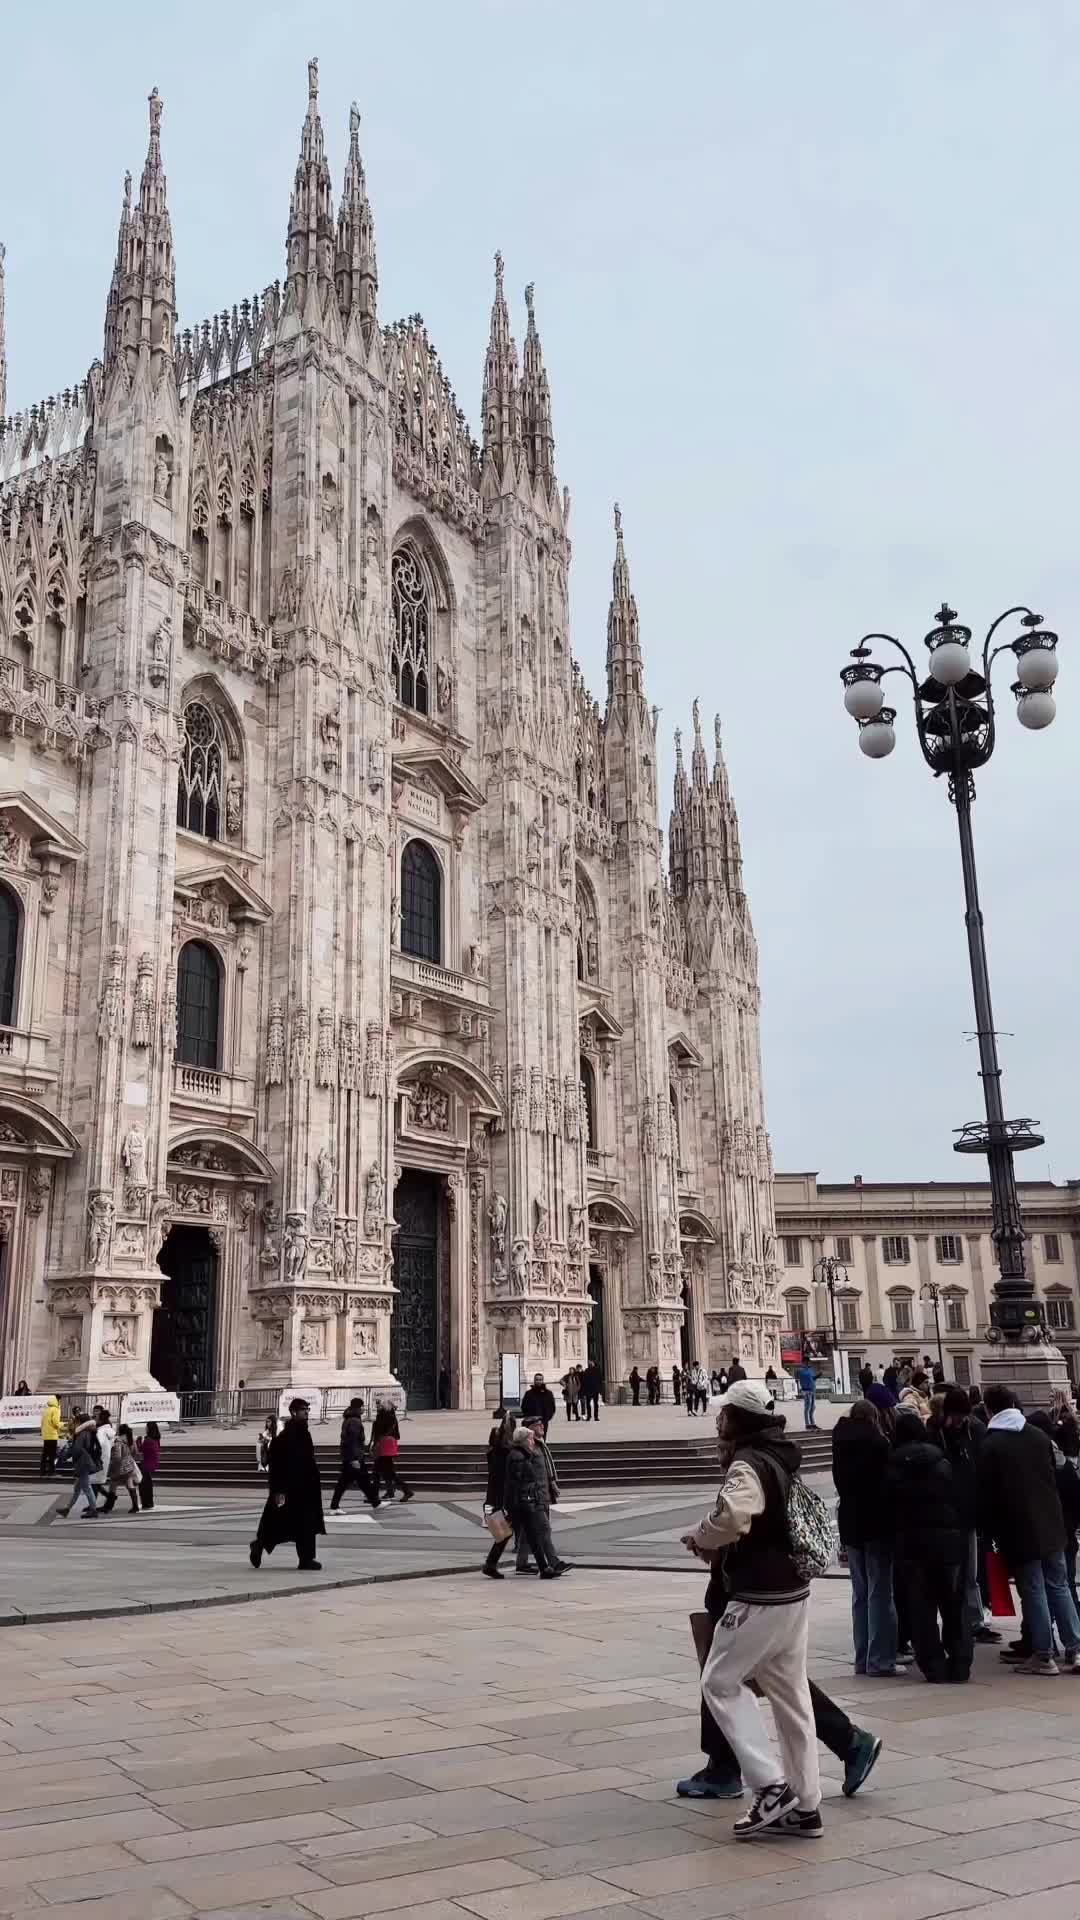 Moody Clouds Over Duomo di Milano - A Stunning View